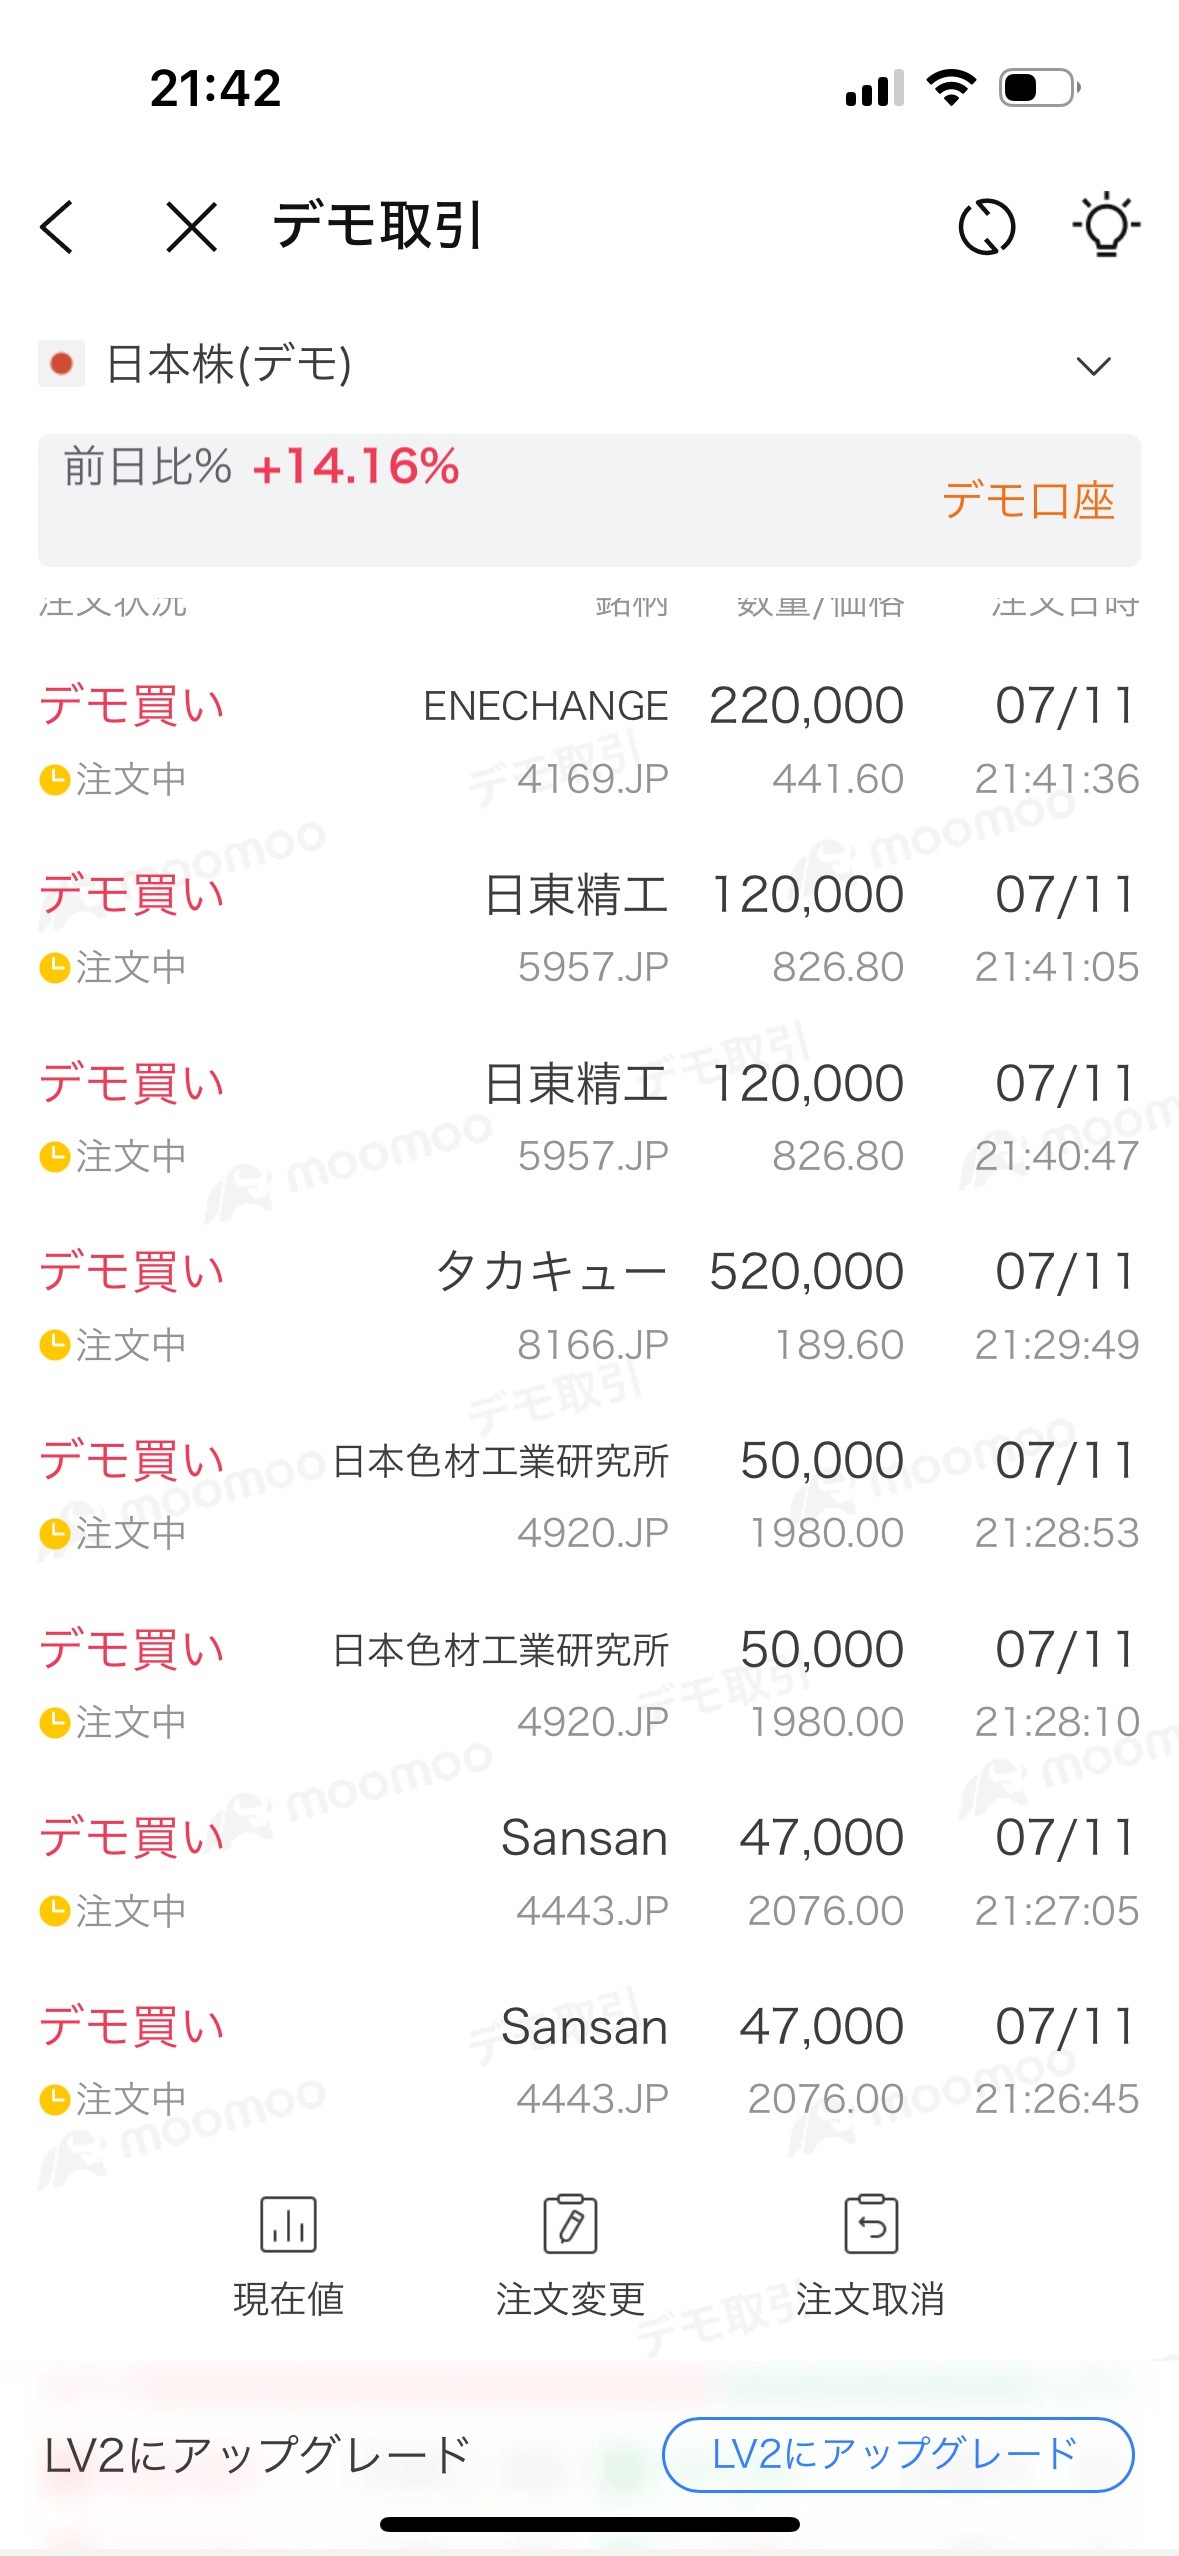 Enecange and Takakyu are buying more. Nitto Seiko, Japan Colorants Industrial Research Institute, and 3 bottles of Sansan